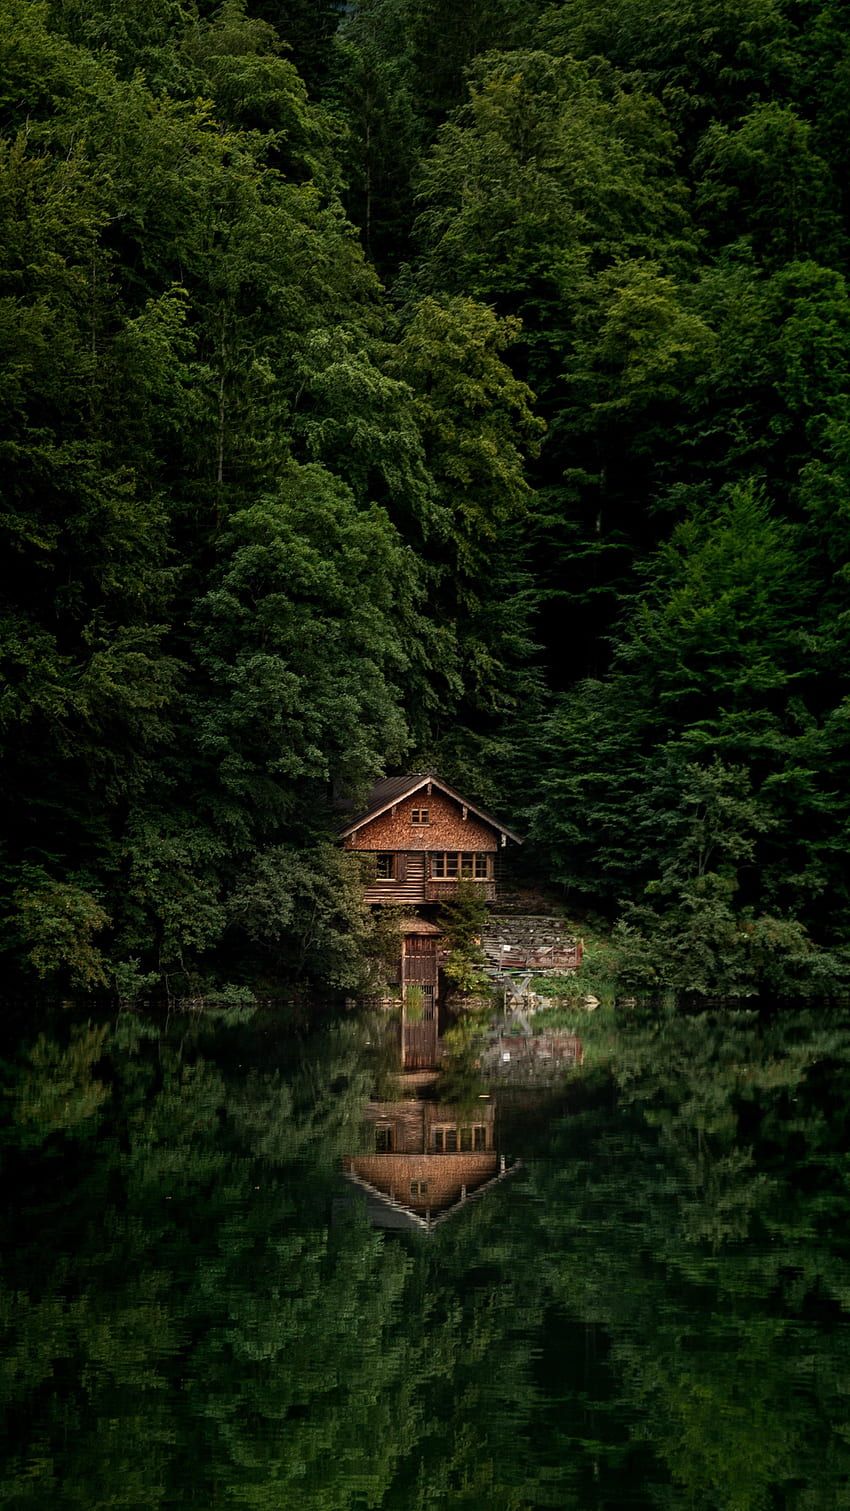 A house on the lake surrounded by trees - Lake